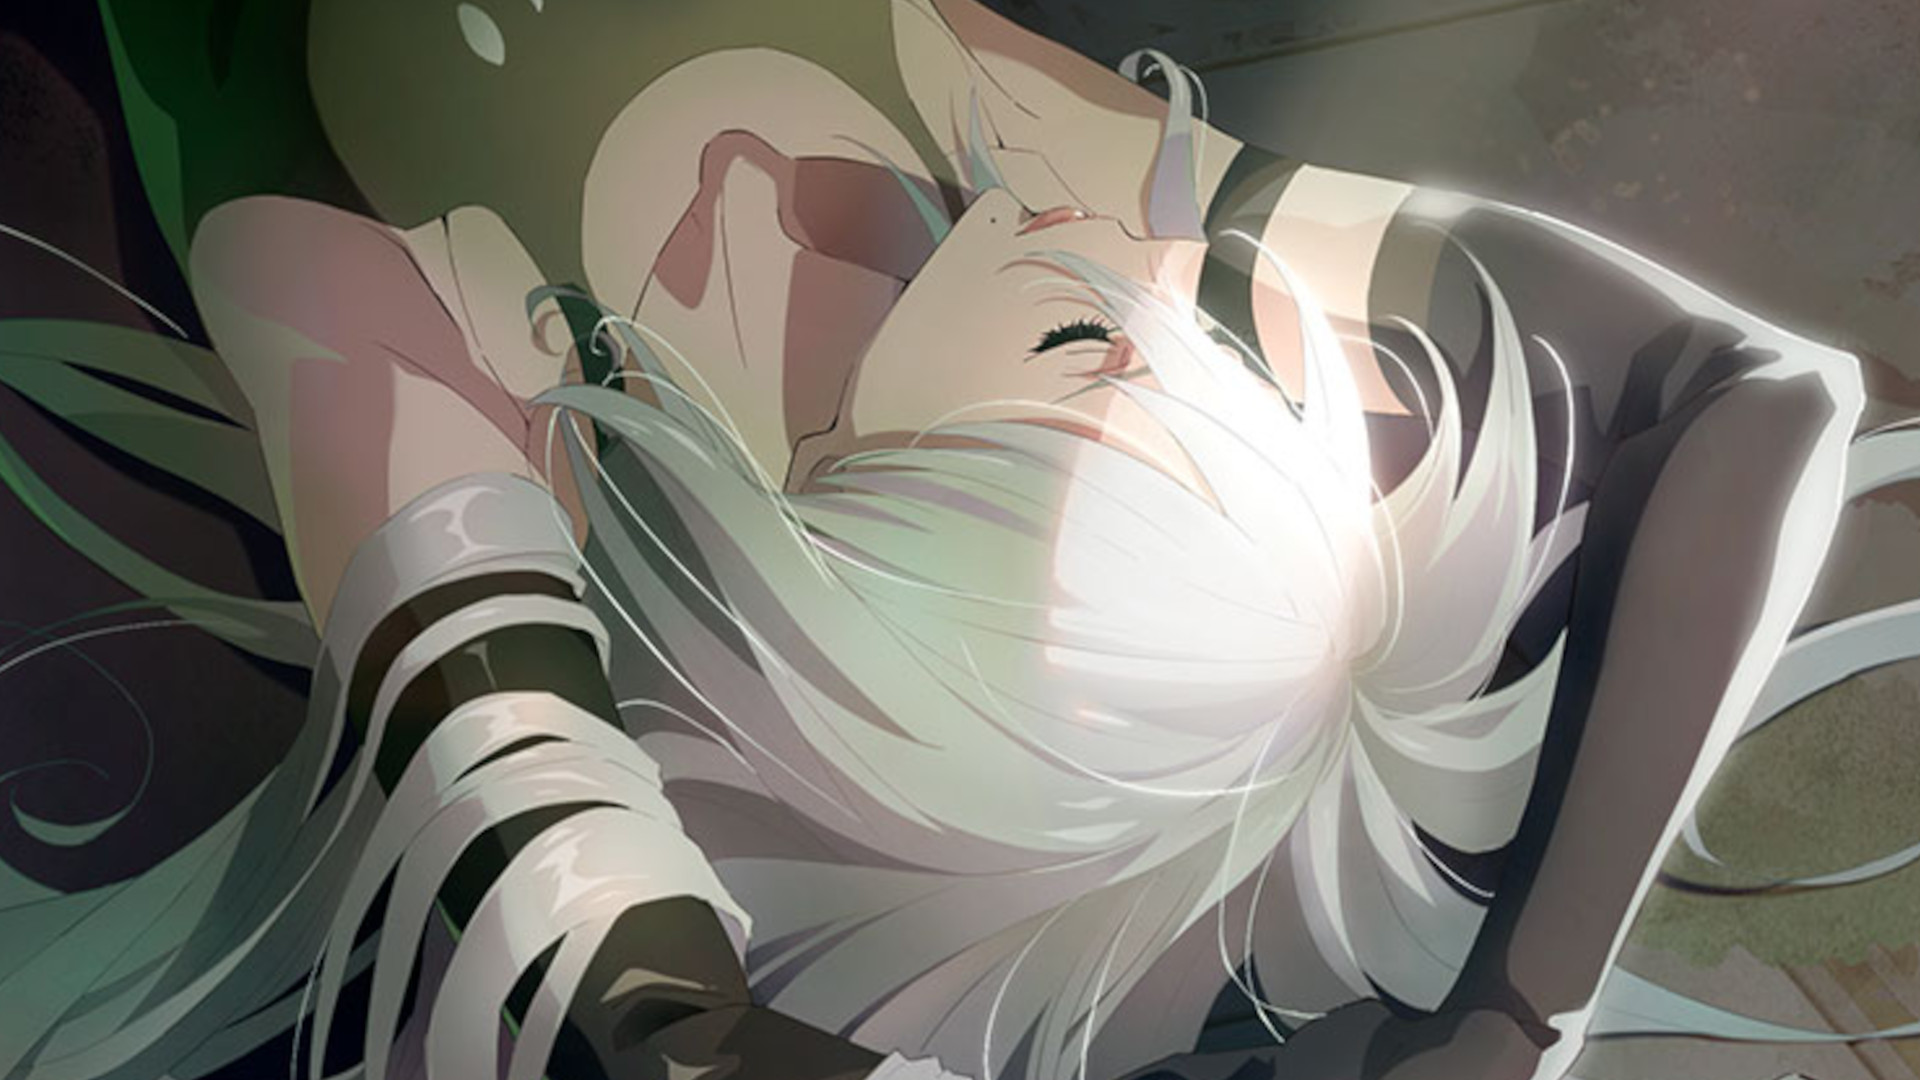 Nier Automata Ver11a anime adaptation pauses production indefinitely   VG247